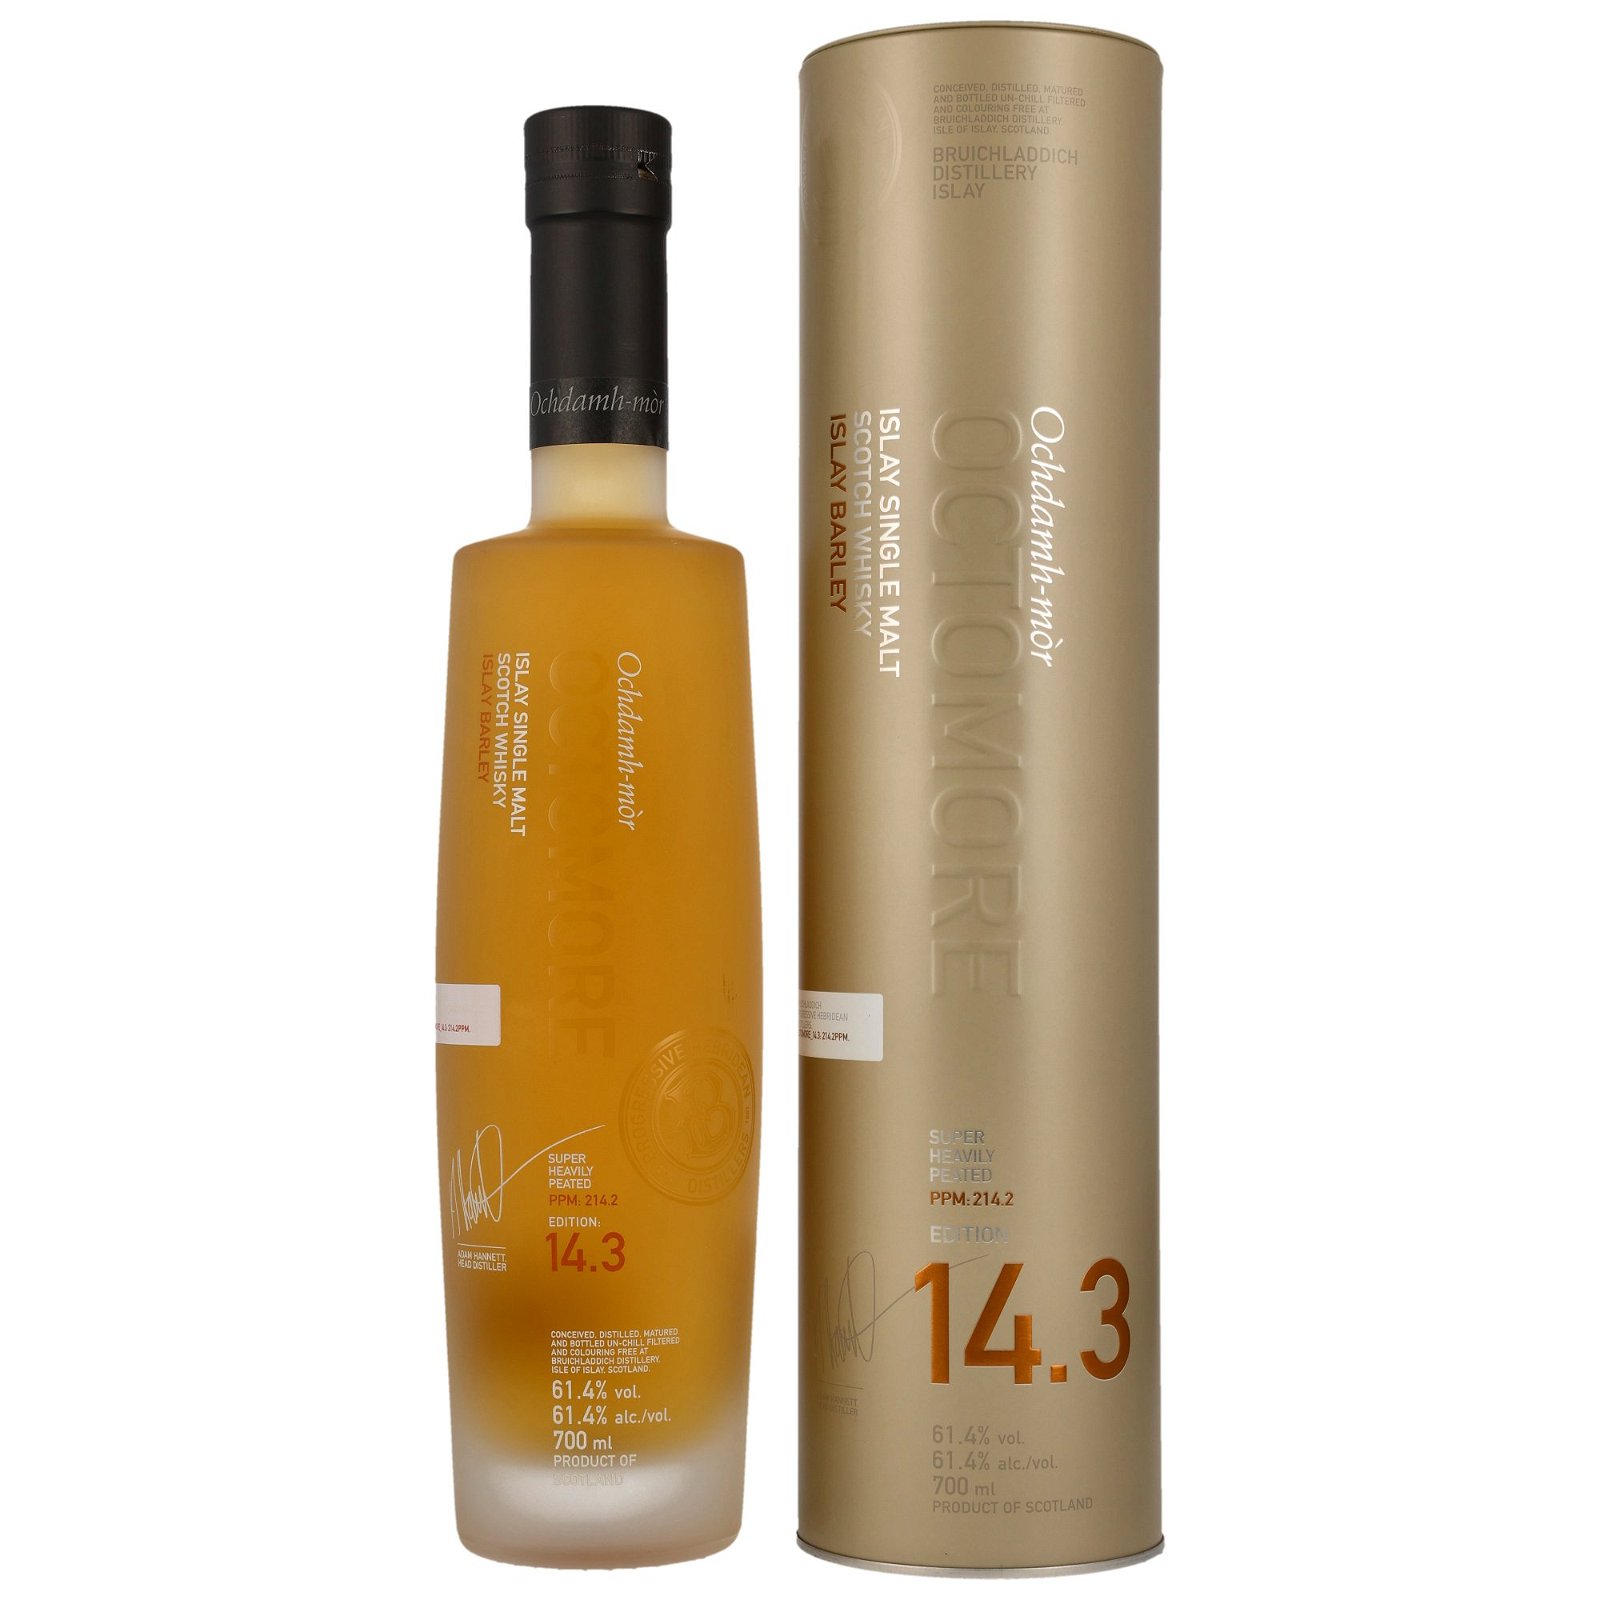 Octomore 14.3 - 5 Jahre Islay Barley Release 2023 (214,2 ppm)